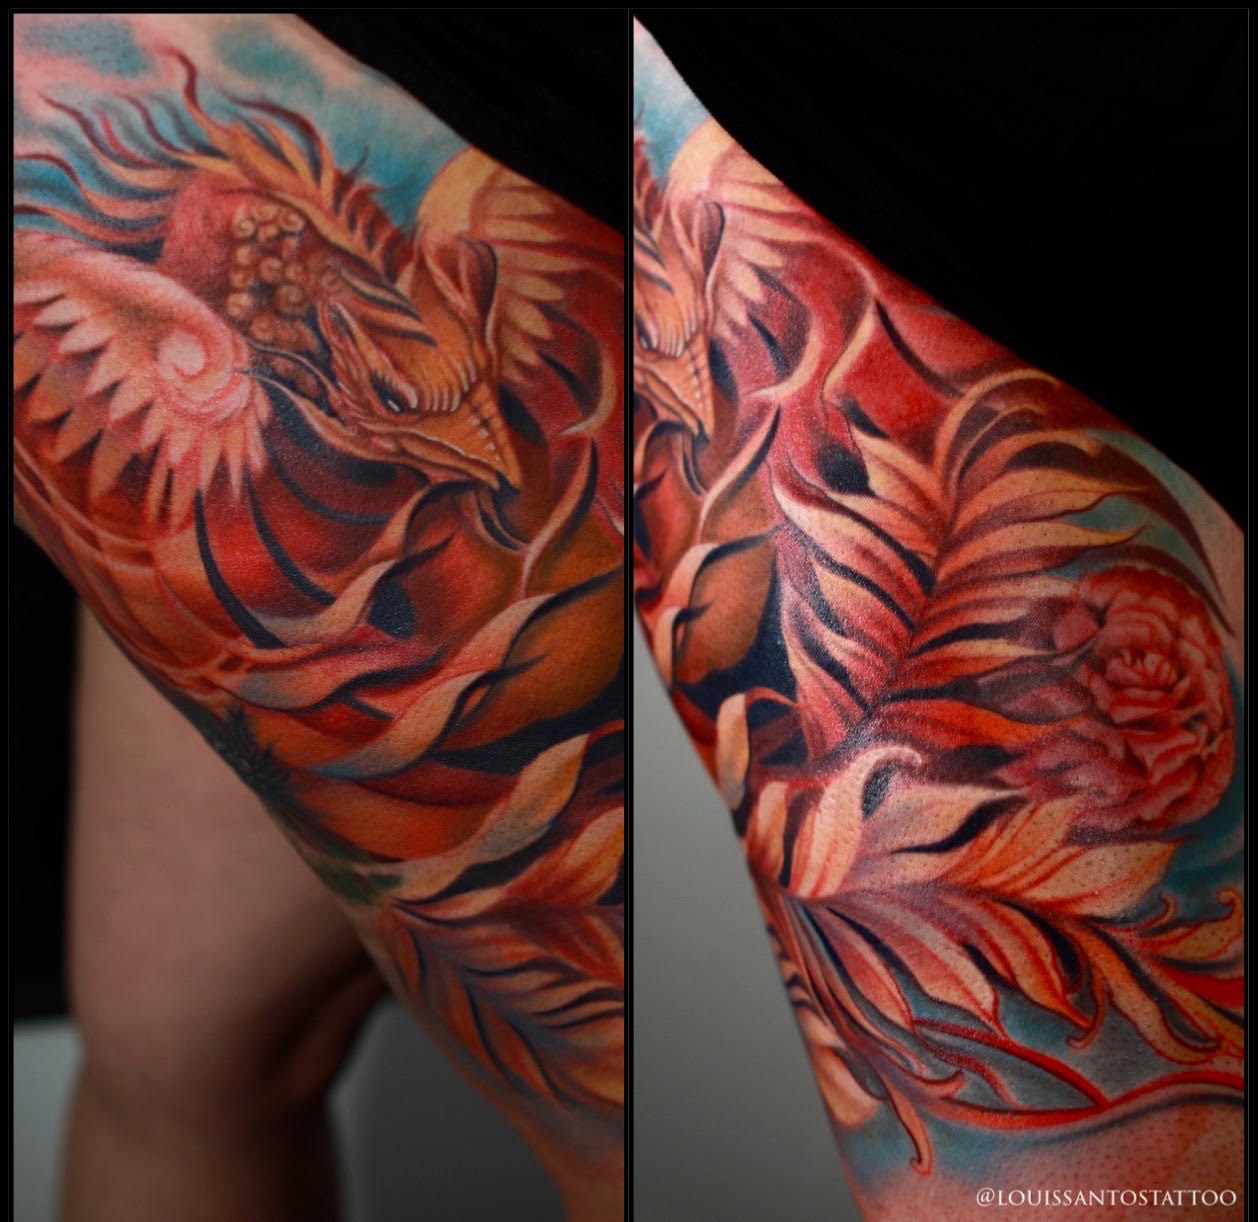 Comsidering getting a Phoenix tattoo on my forearm, can anyone whos got  tats tell me about forearm tats? The pros and cons and what to know?  Thanks. - Quora